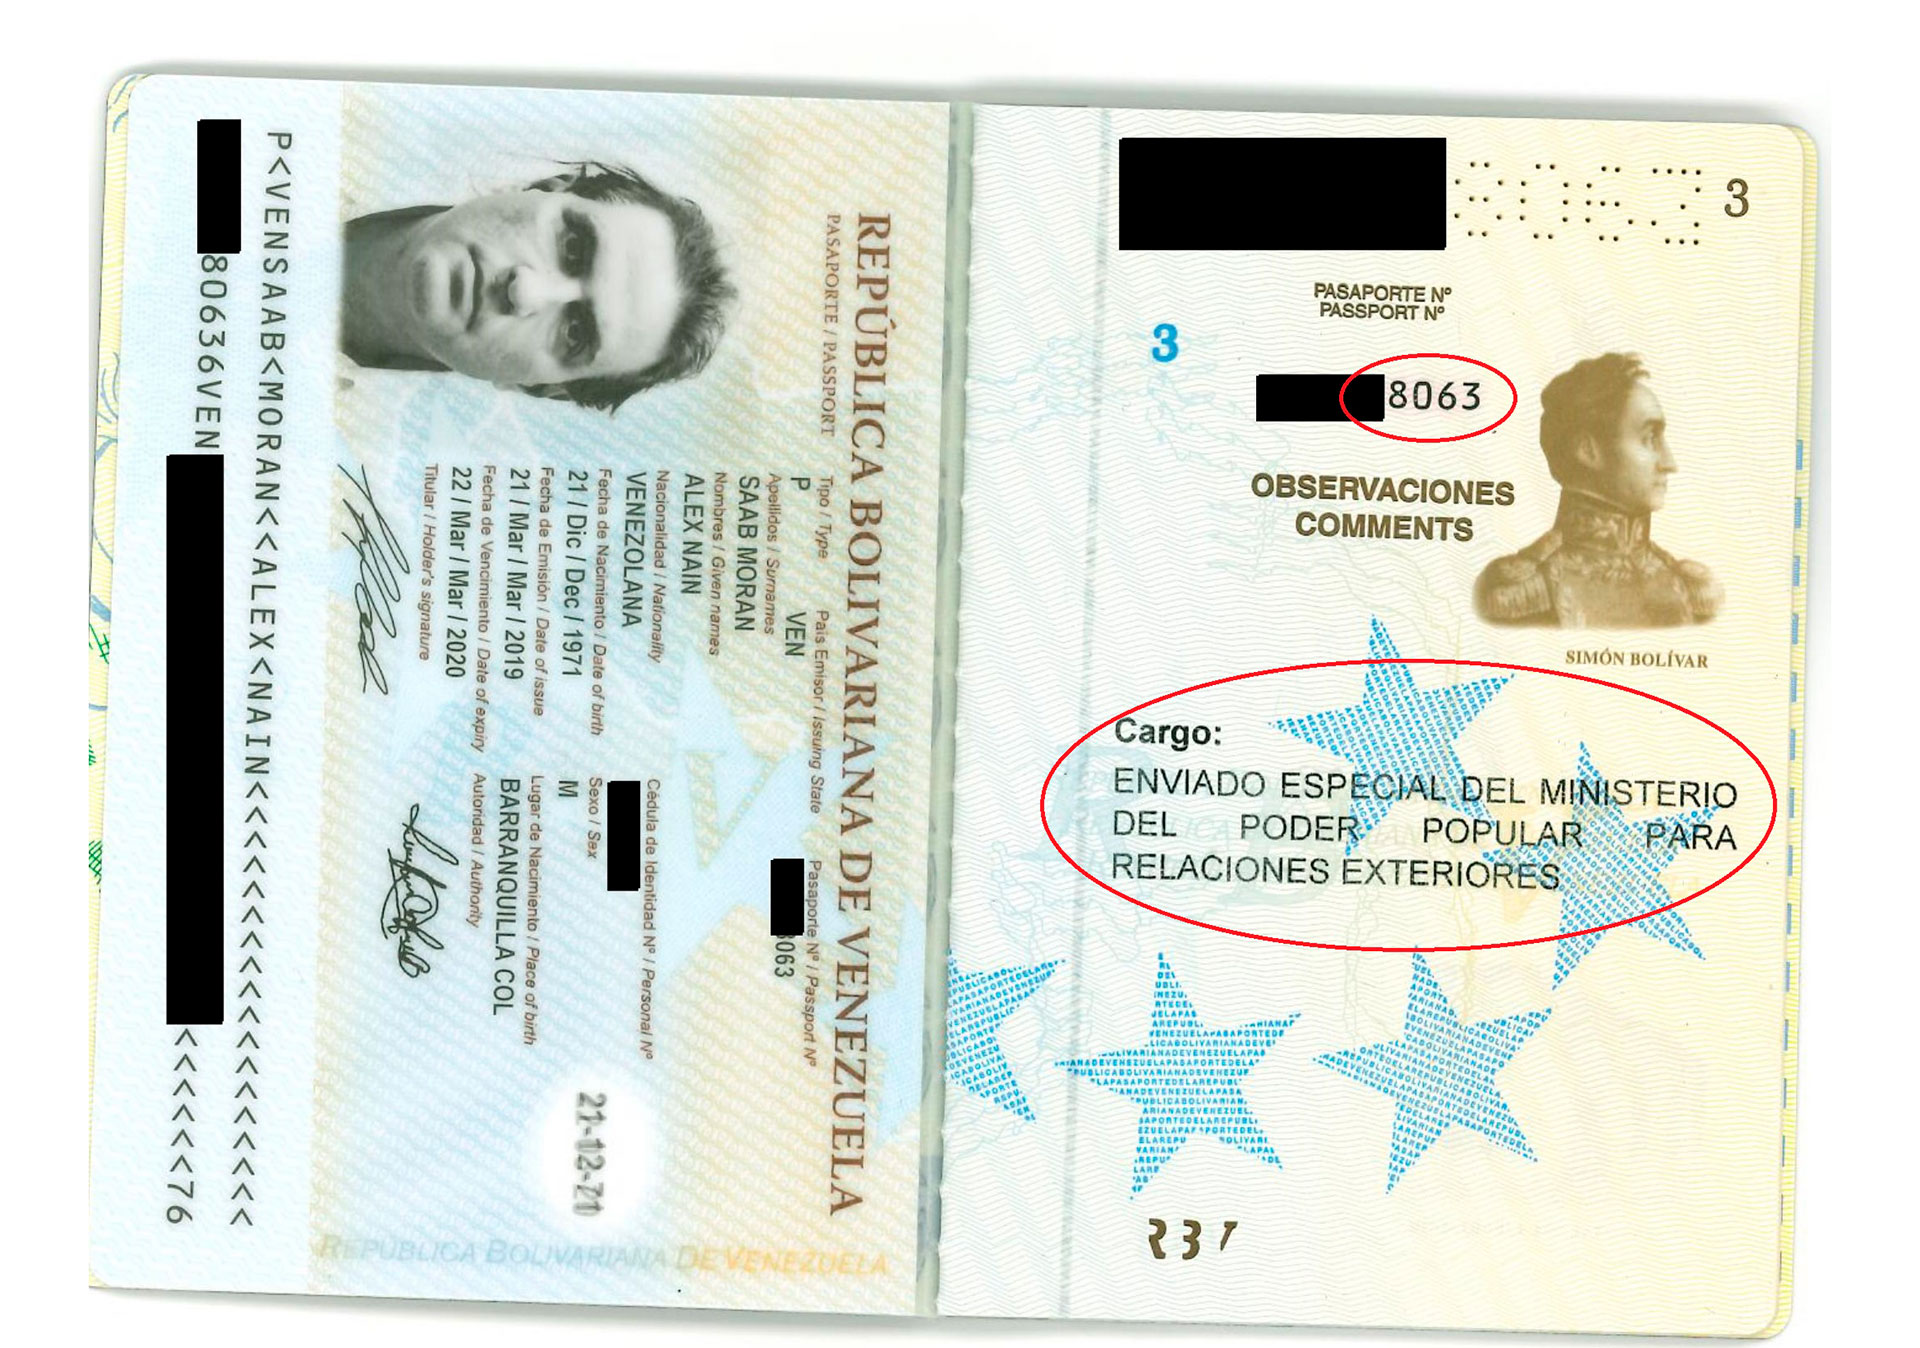 The passport number shown by Saab's lawyers is 8063